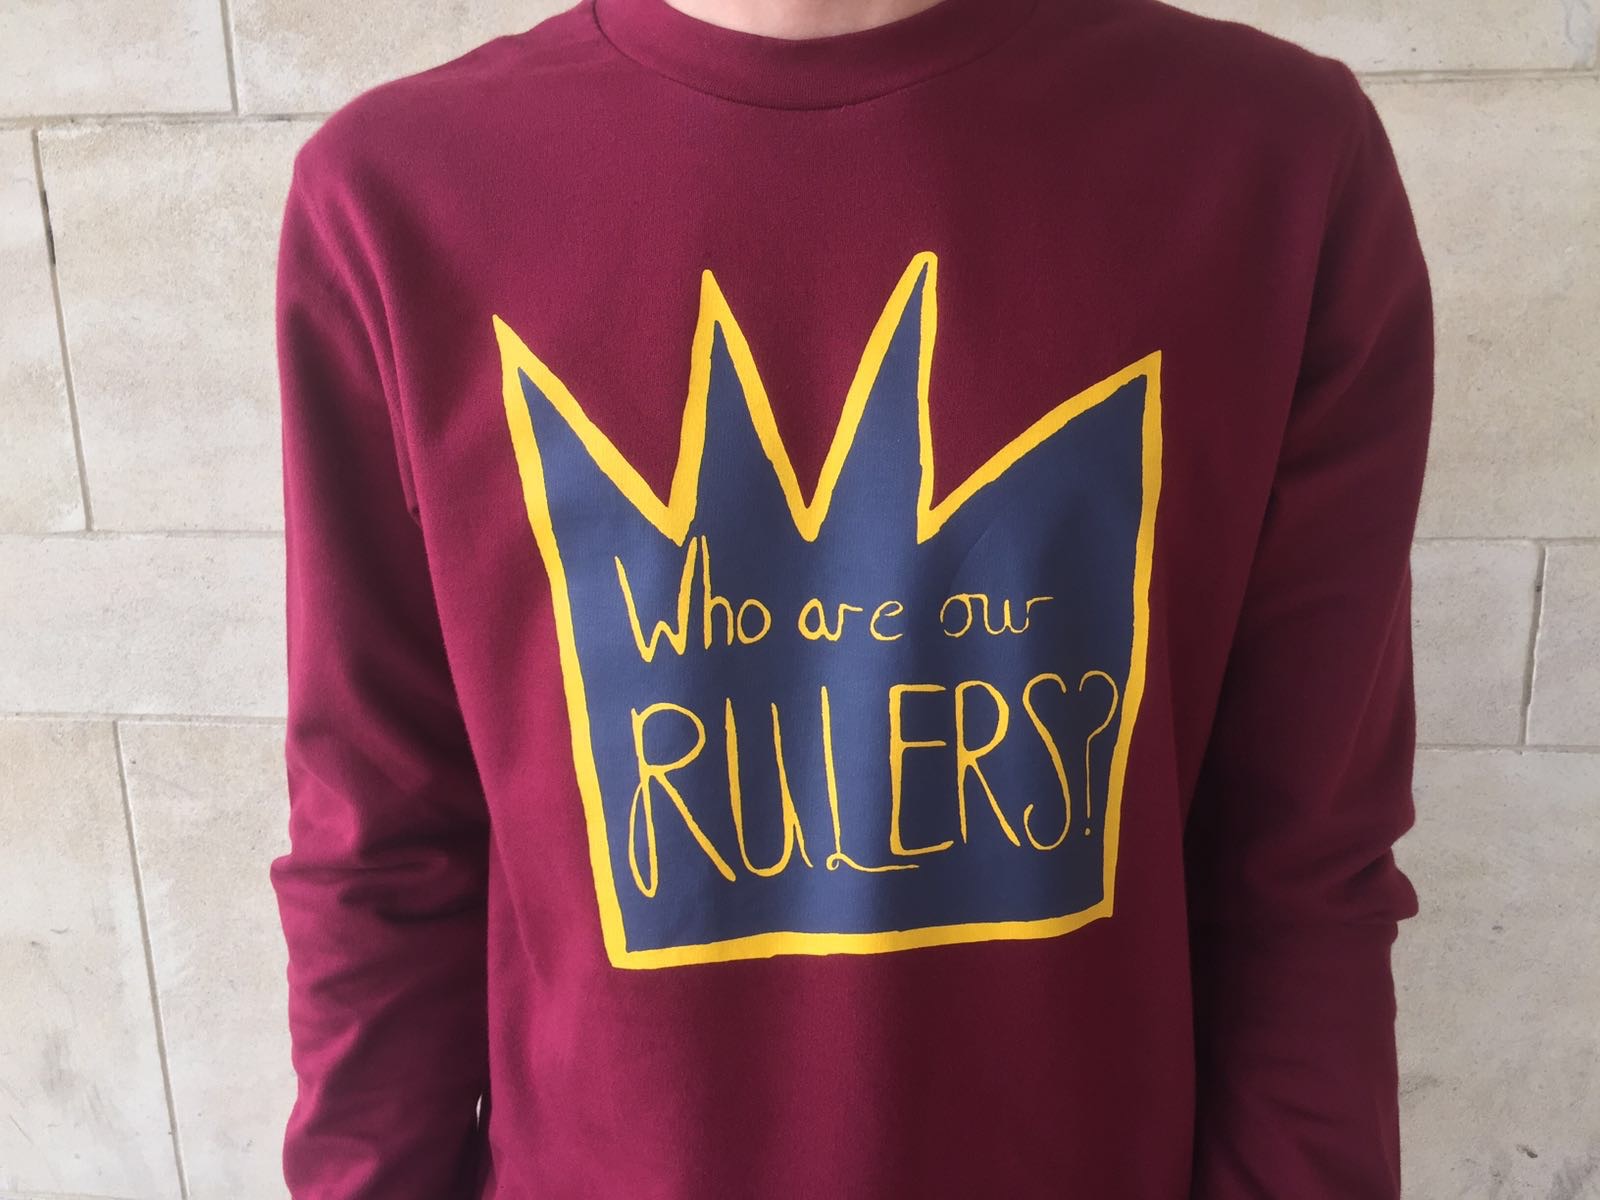 Who are our rulers?